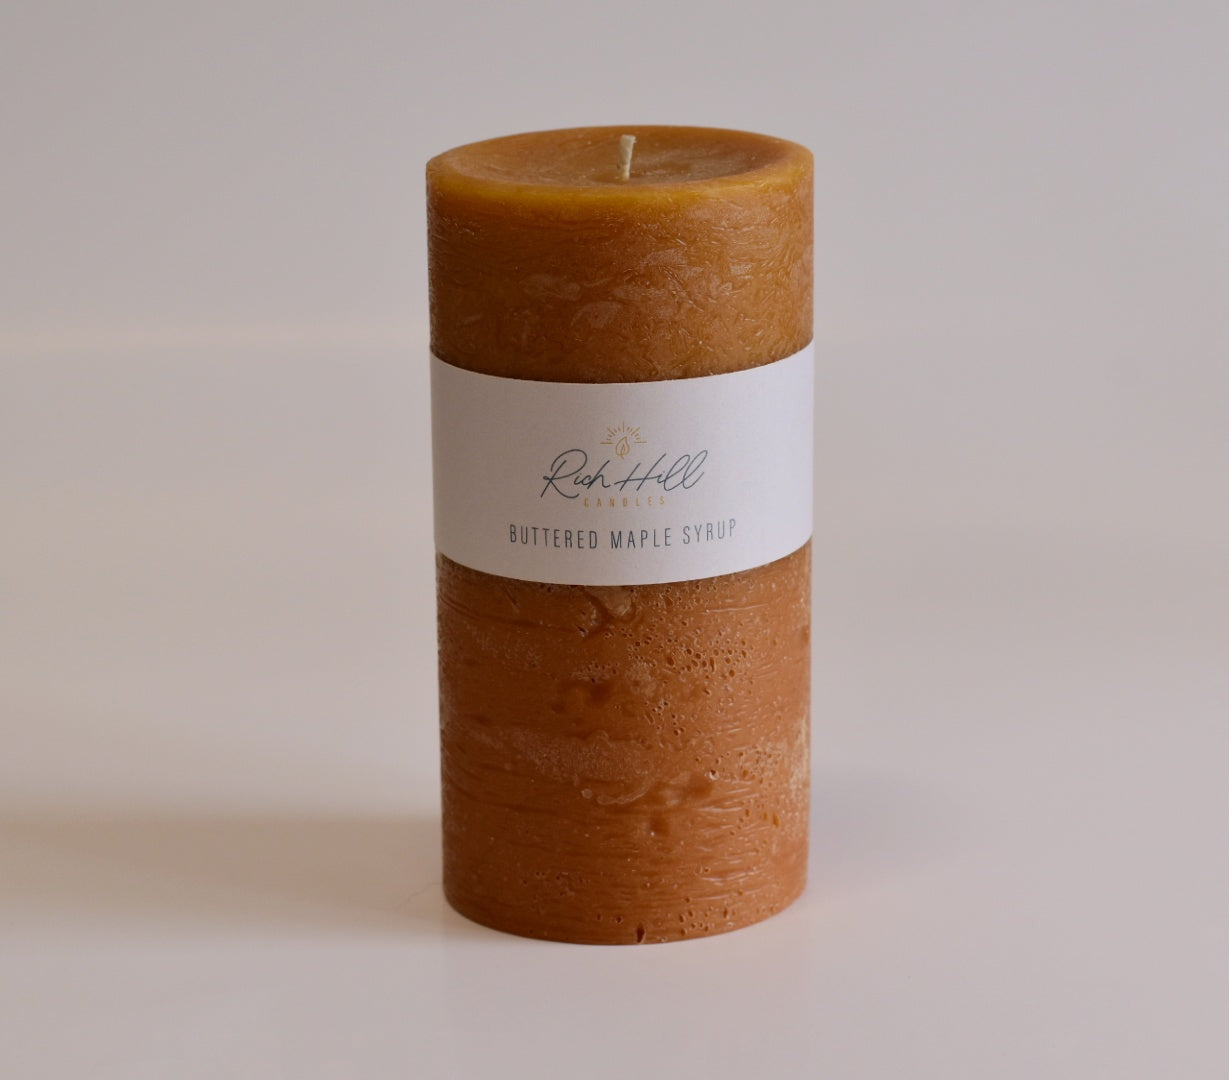 Buttered Maple Syrup Scented Rustic Pillars